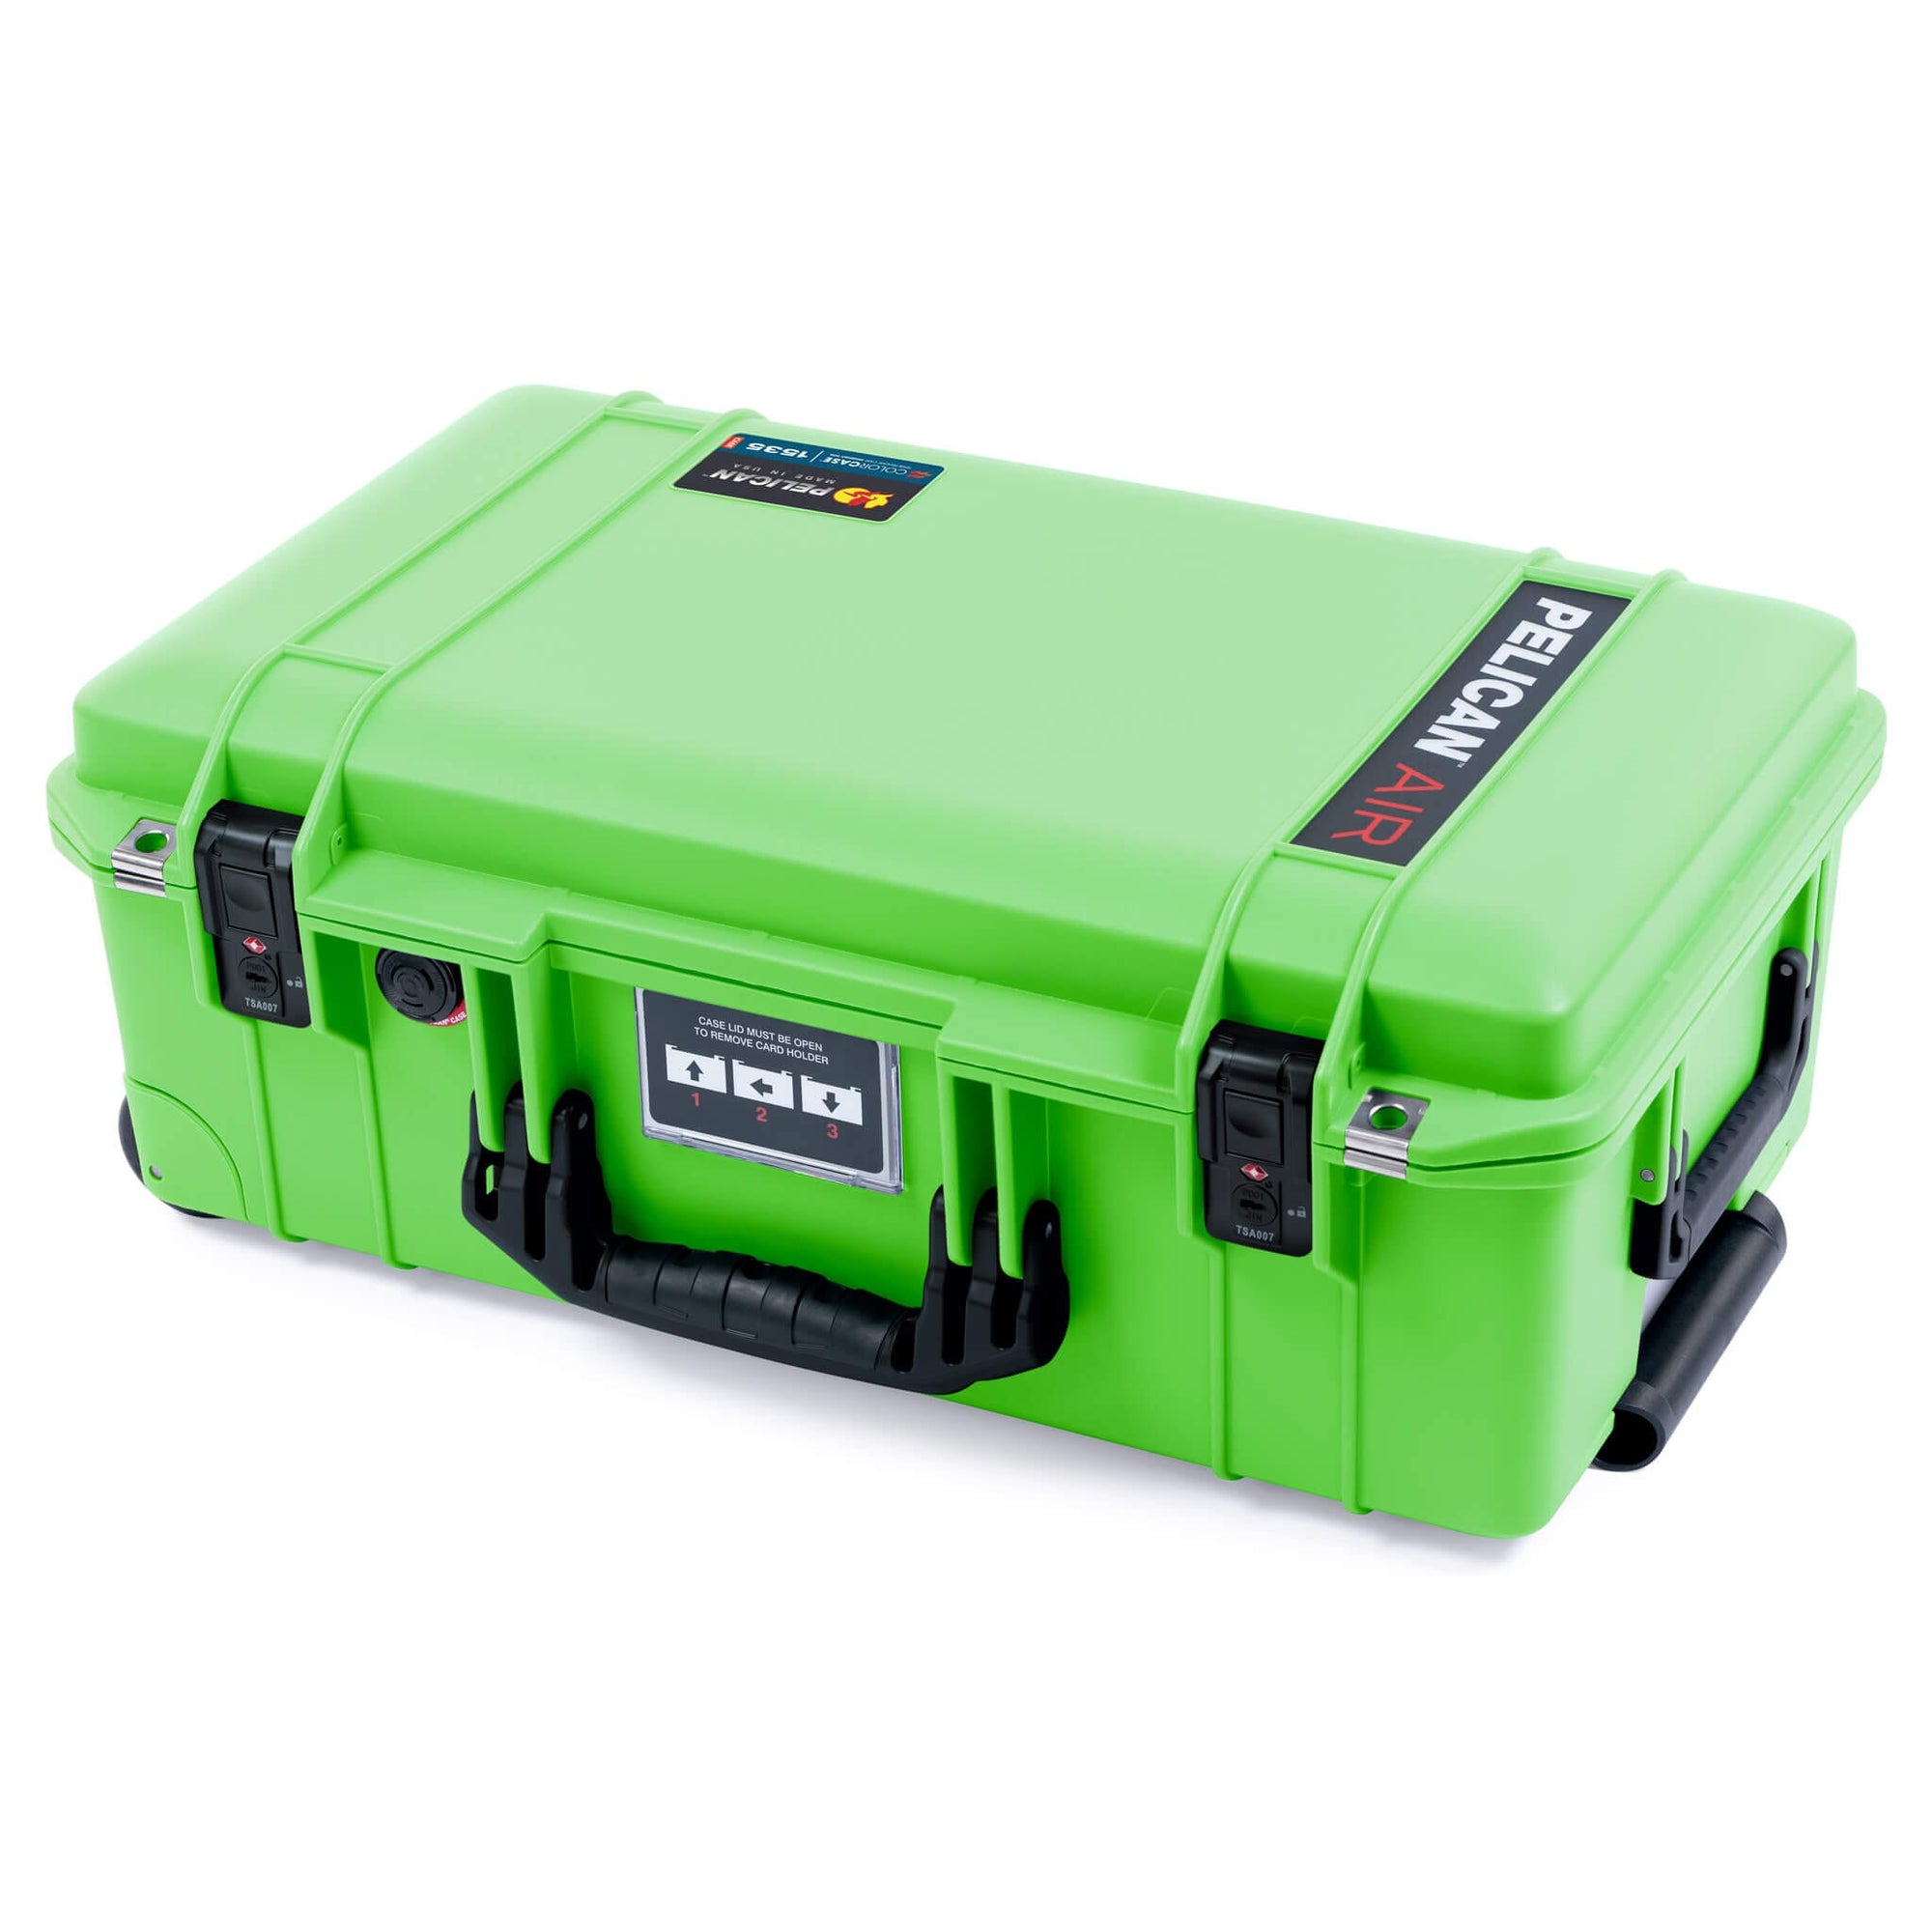 Pelican 1535 Air Case, Lime Green with Black Handles & TSA Locking Latches ColorCase 